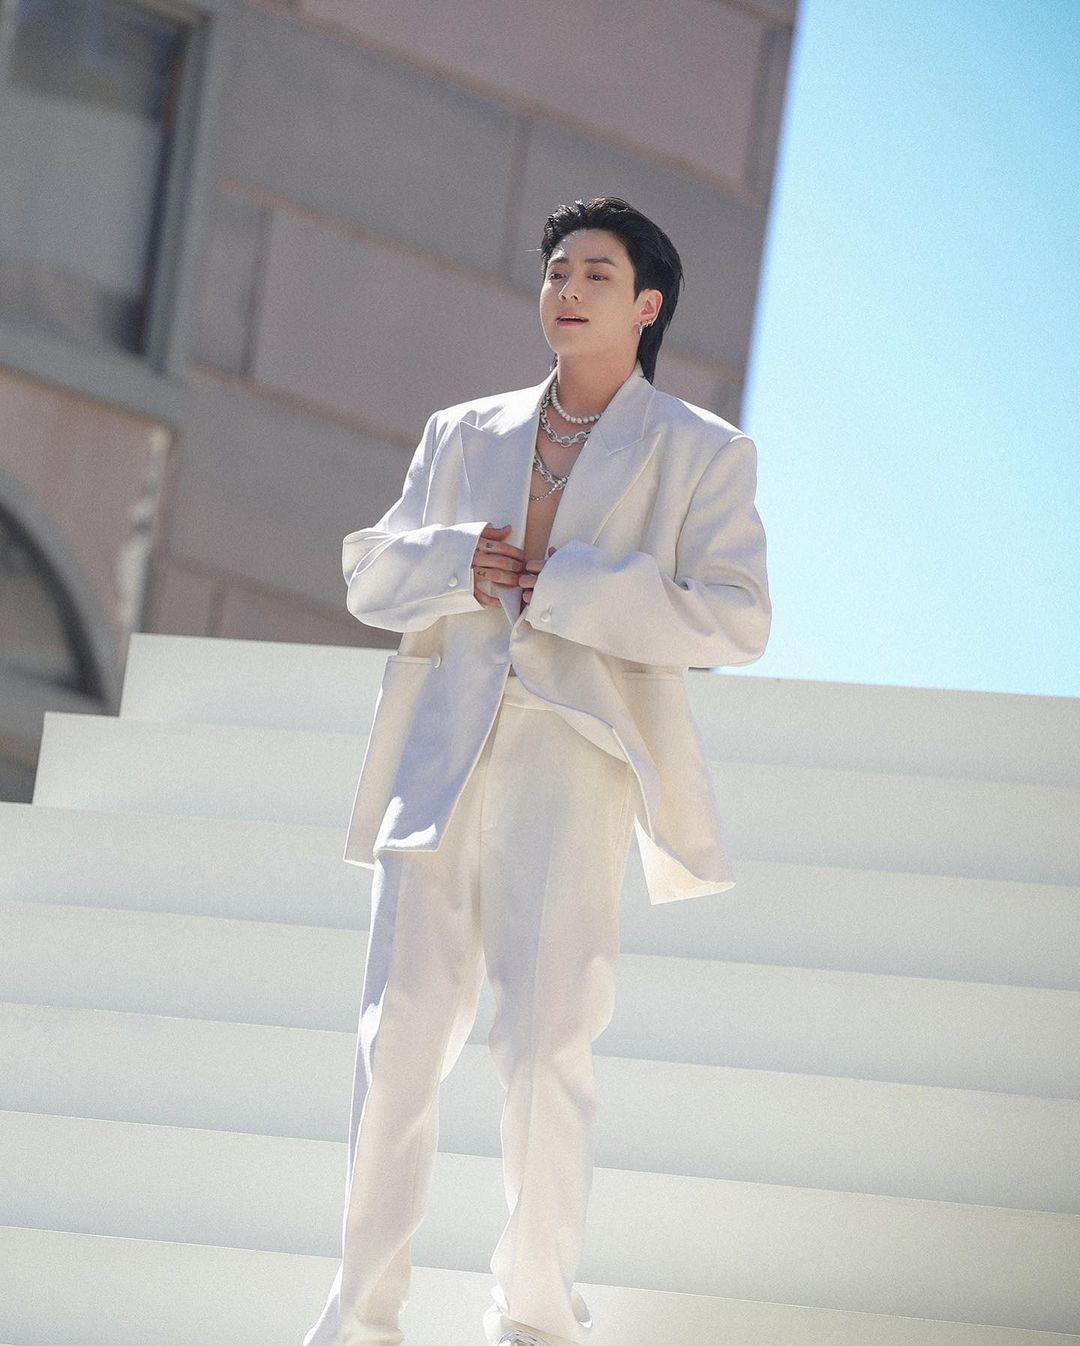 This white suit look, accentuating the K-pop star's broad shoulders, is definitely one of the best fashion moments of Jungkook